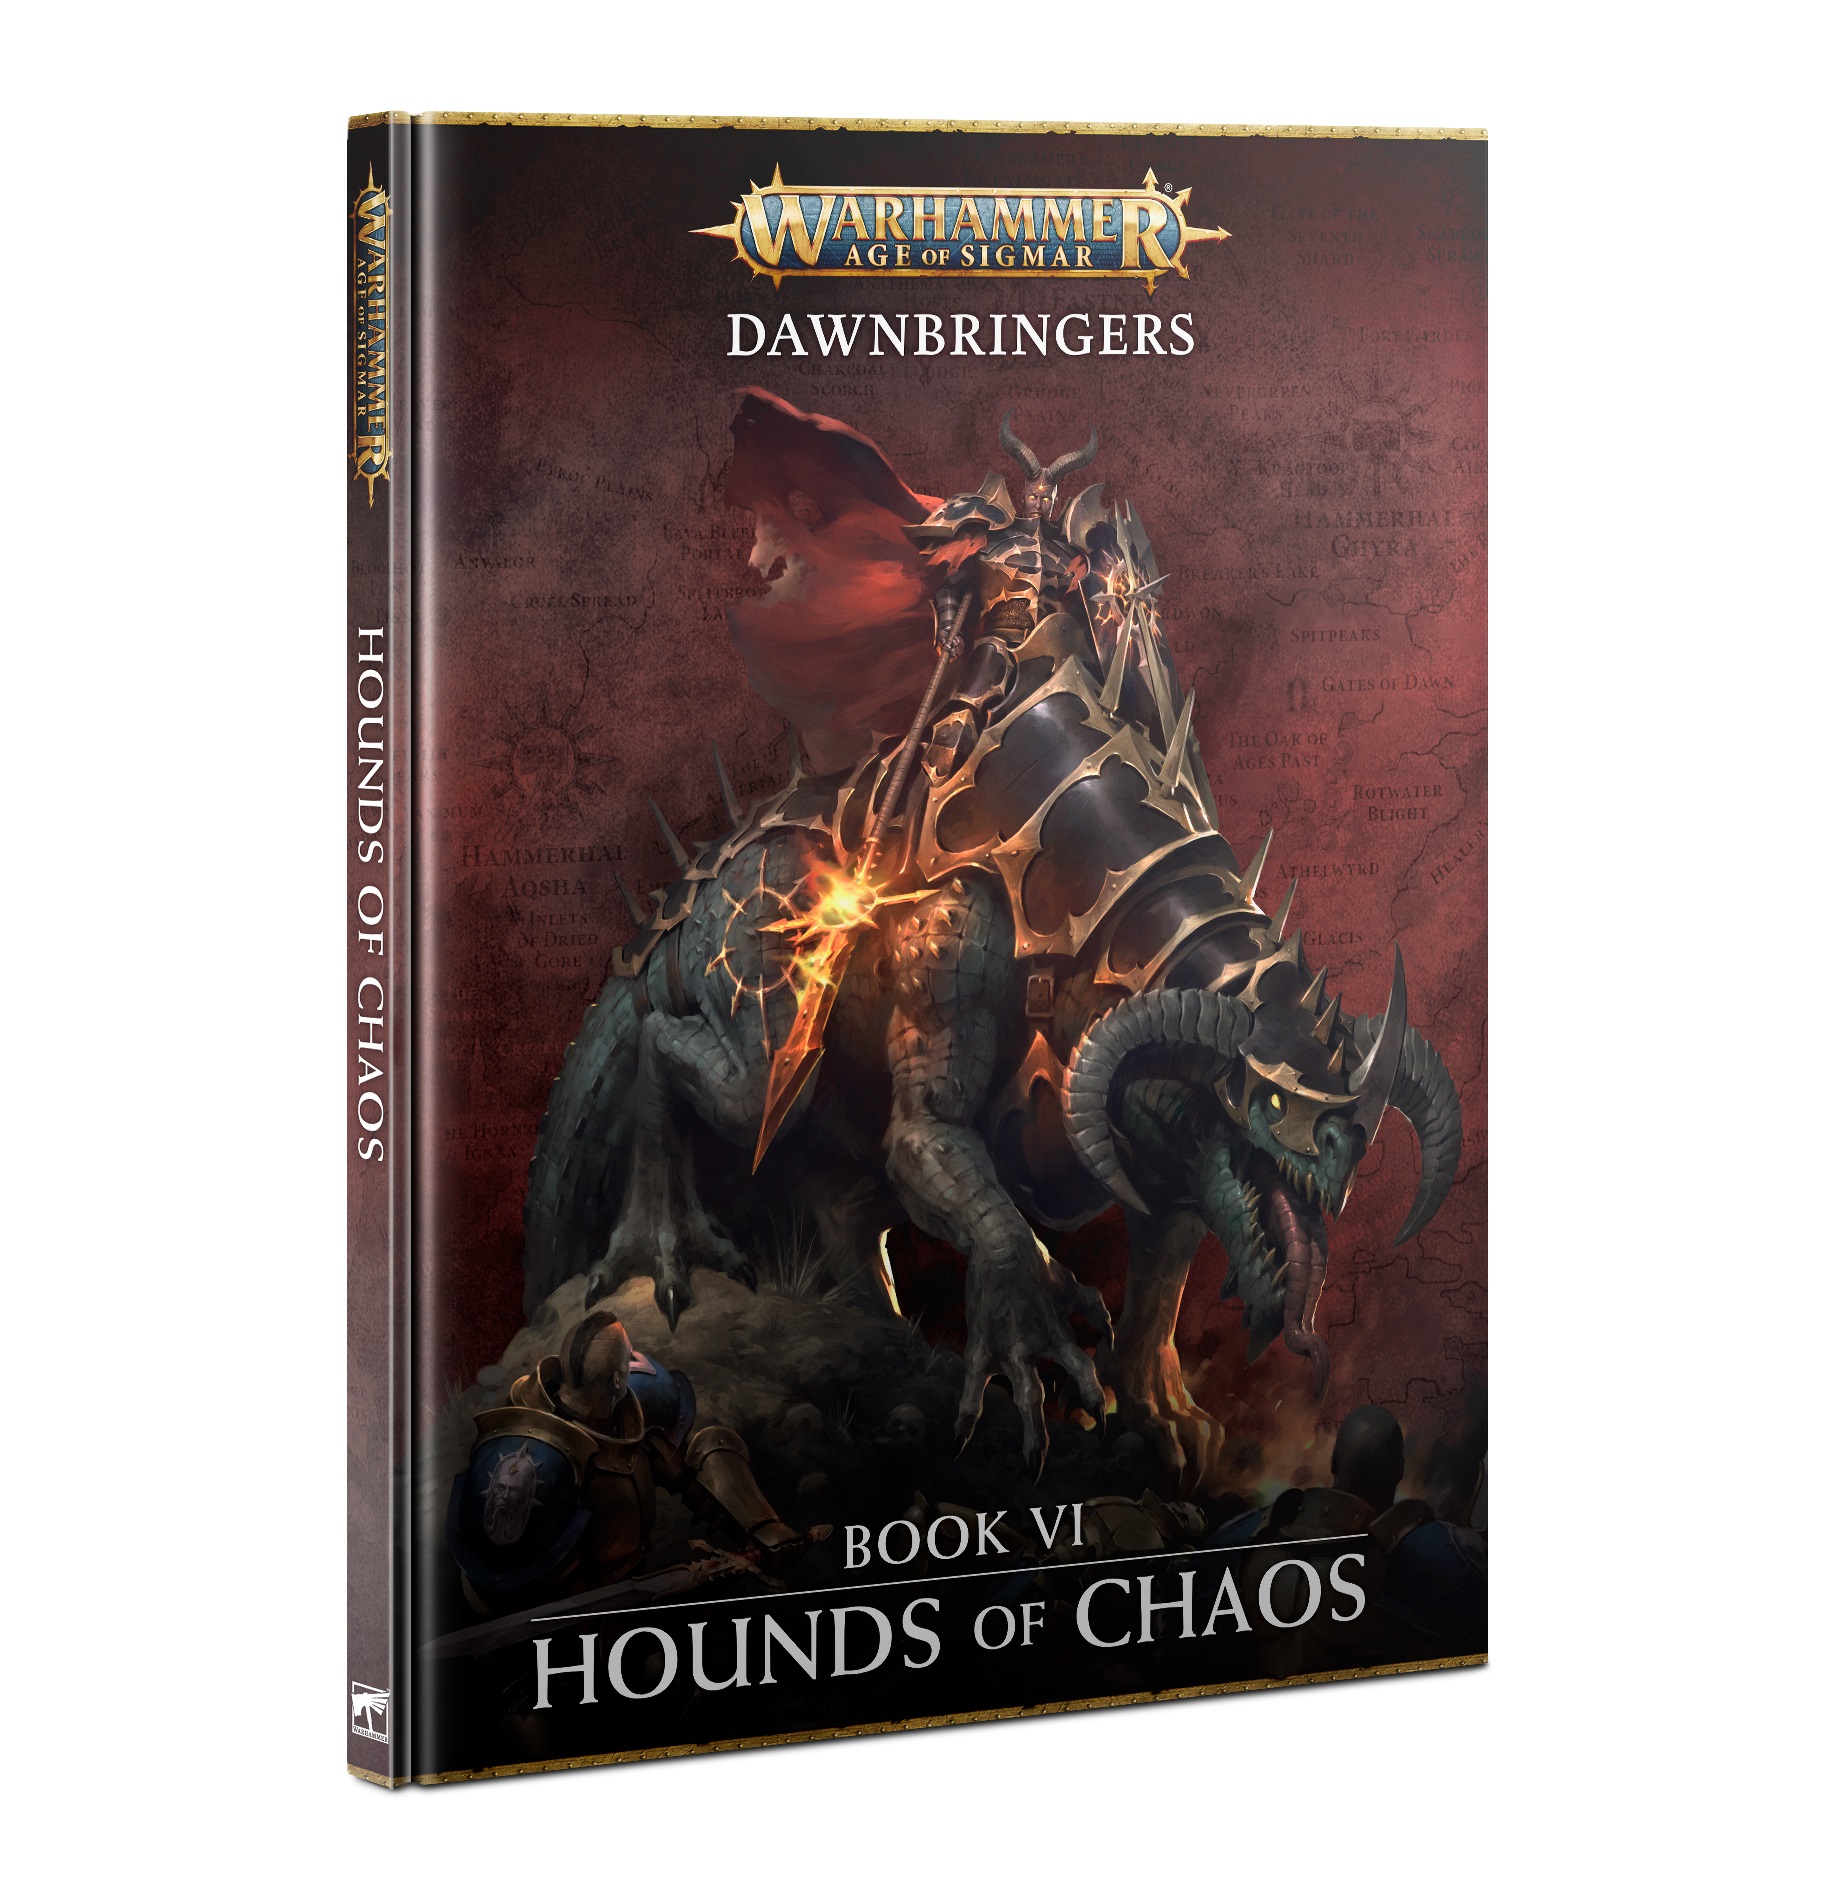 Dawnbringers Book VI: Hounds of Chaos